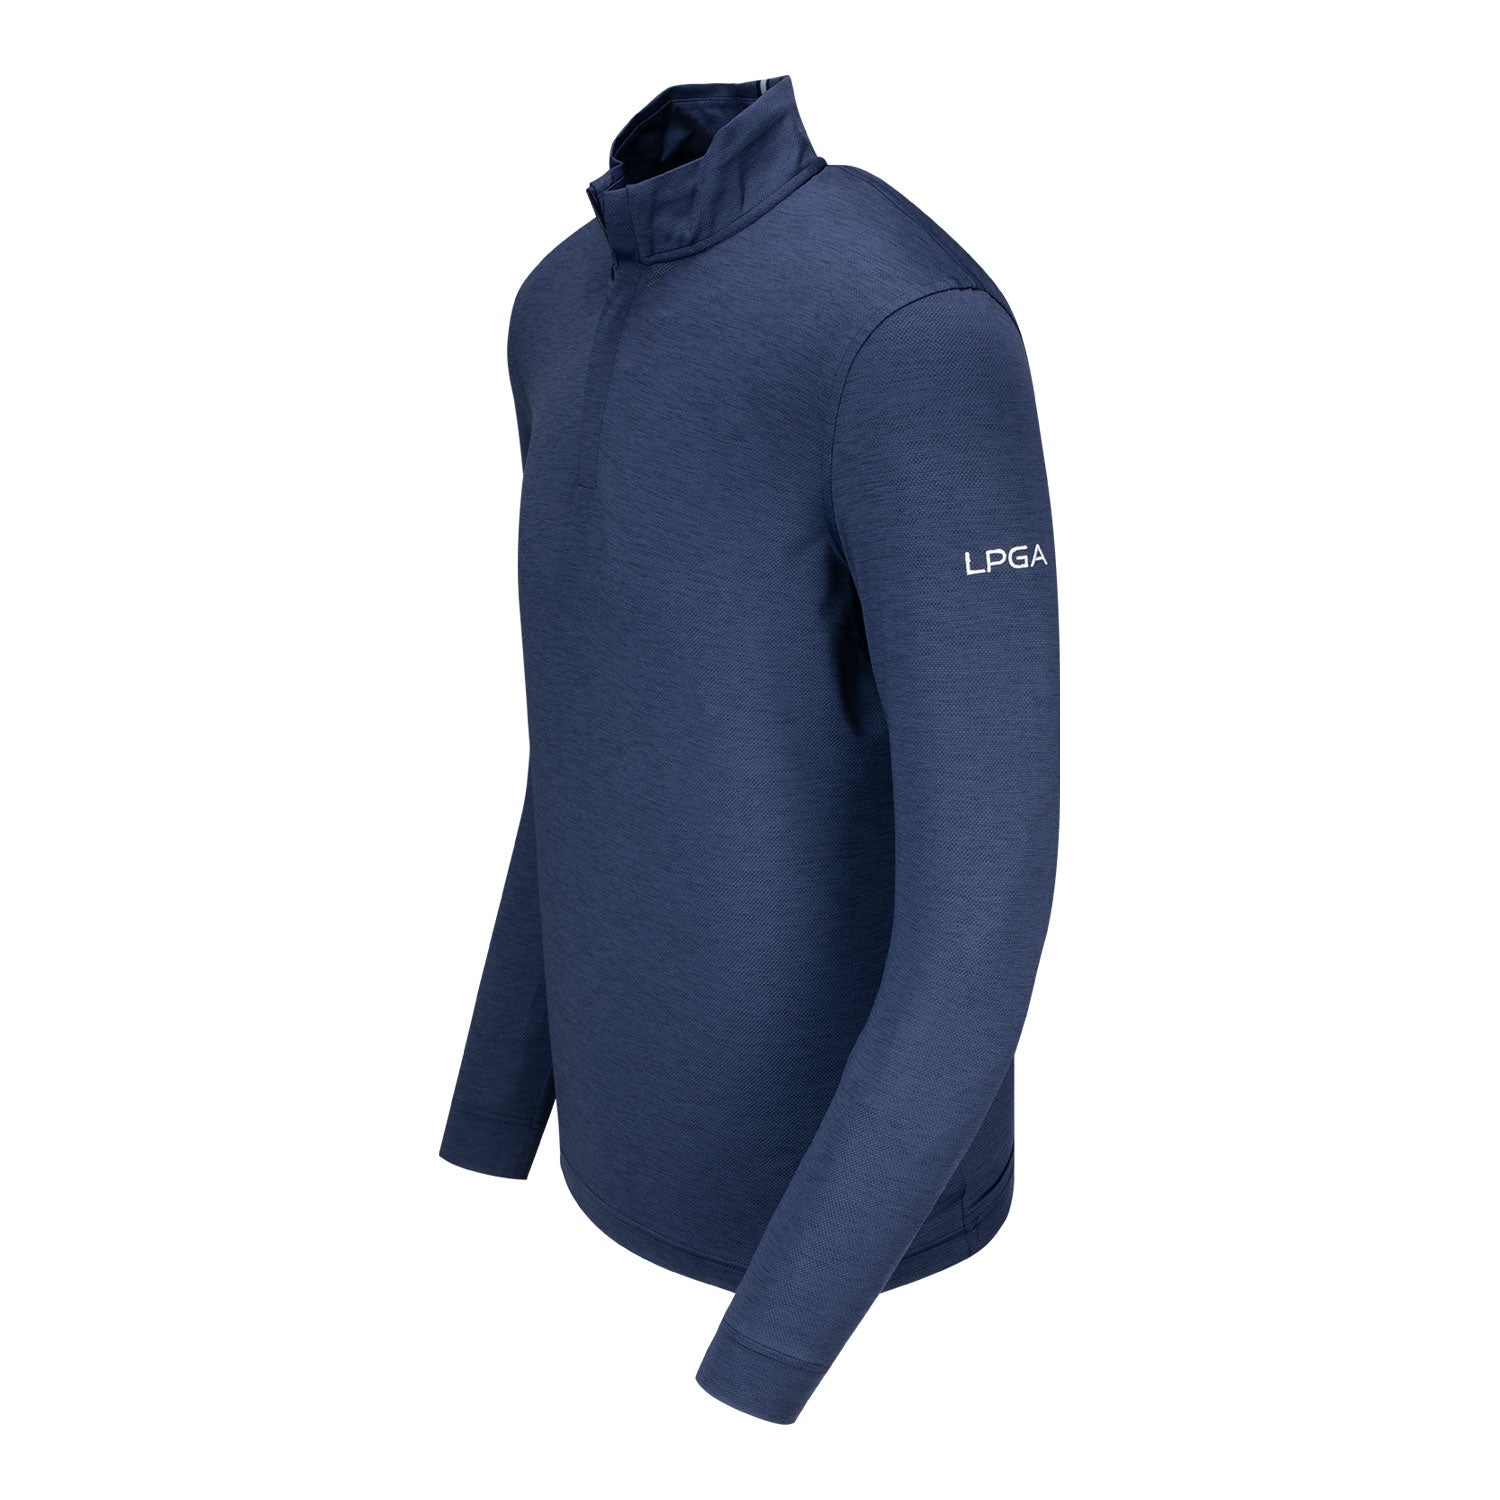 Under Armour LPGA Men's Playoff 3.0 Heather Quarter Zip - Angled Left Side View